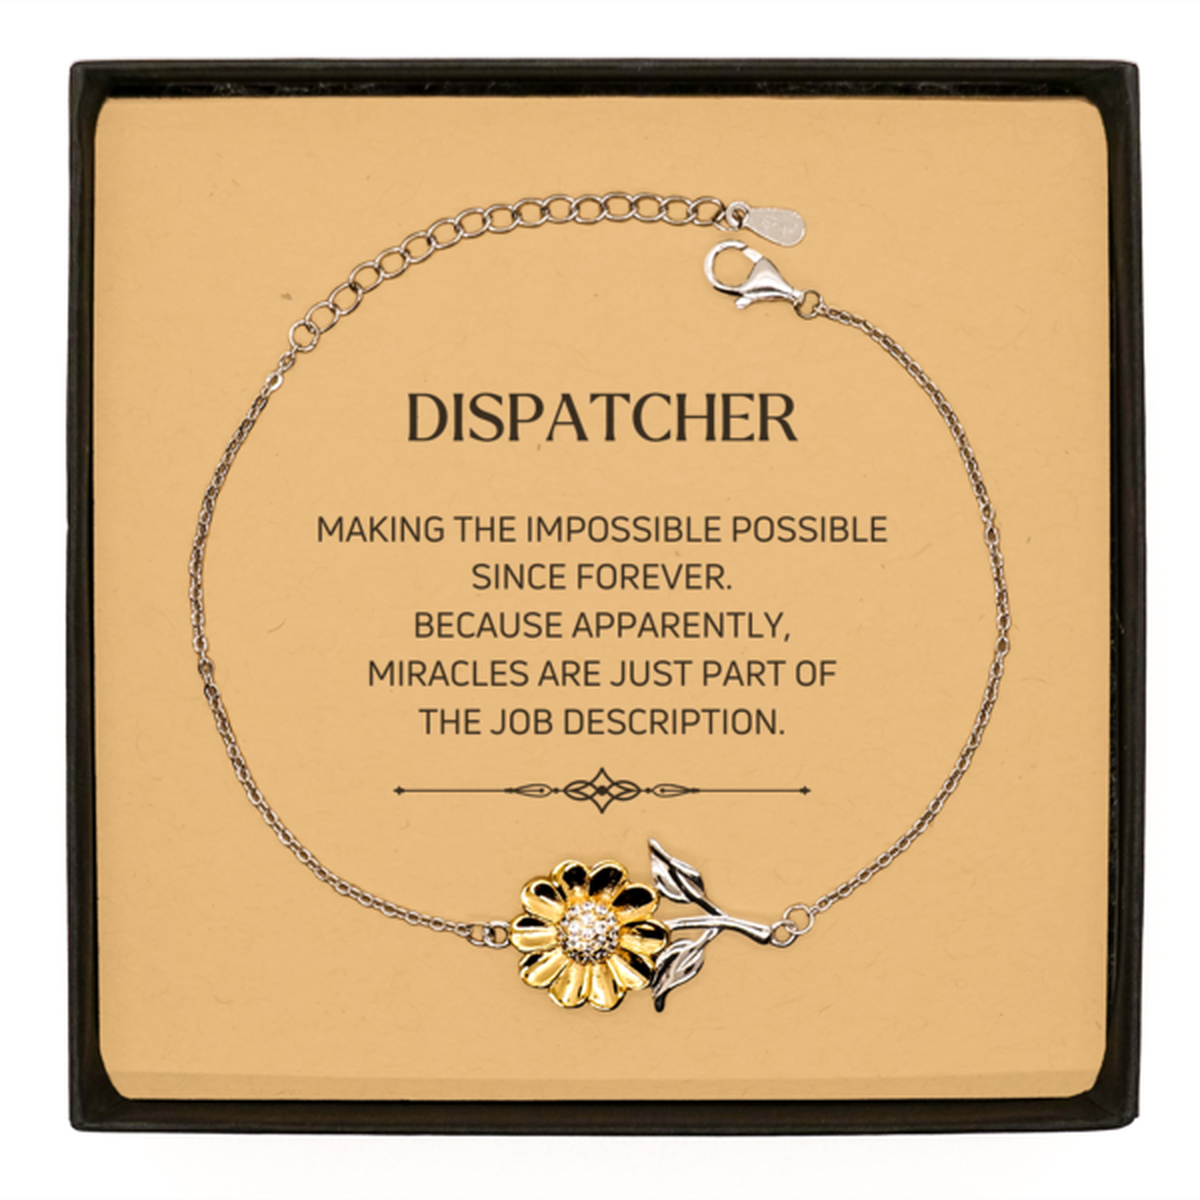 Funny Dispatcher Gifts, Miracles are just part of the job description, Inspirational Birthday Sunflower Bracelet For Dispatcher, Men, Women, Coworkers, Friends, Boss